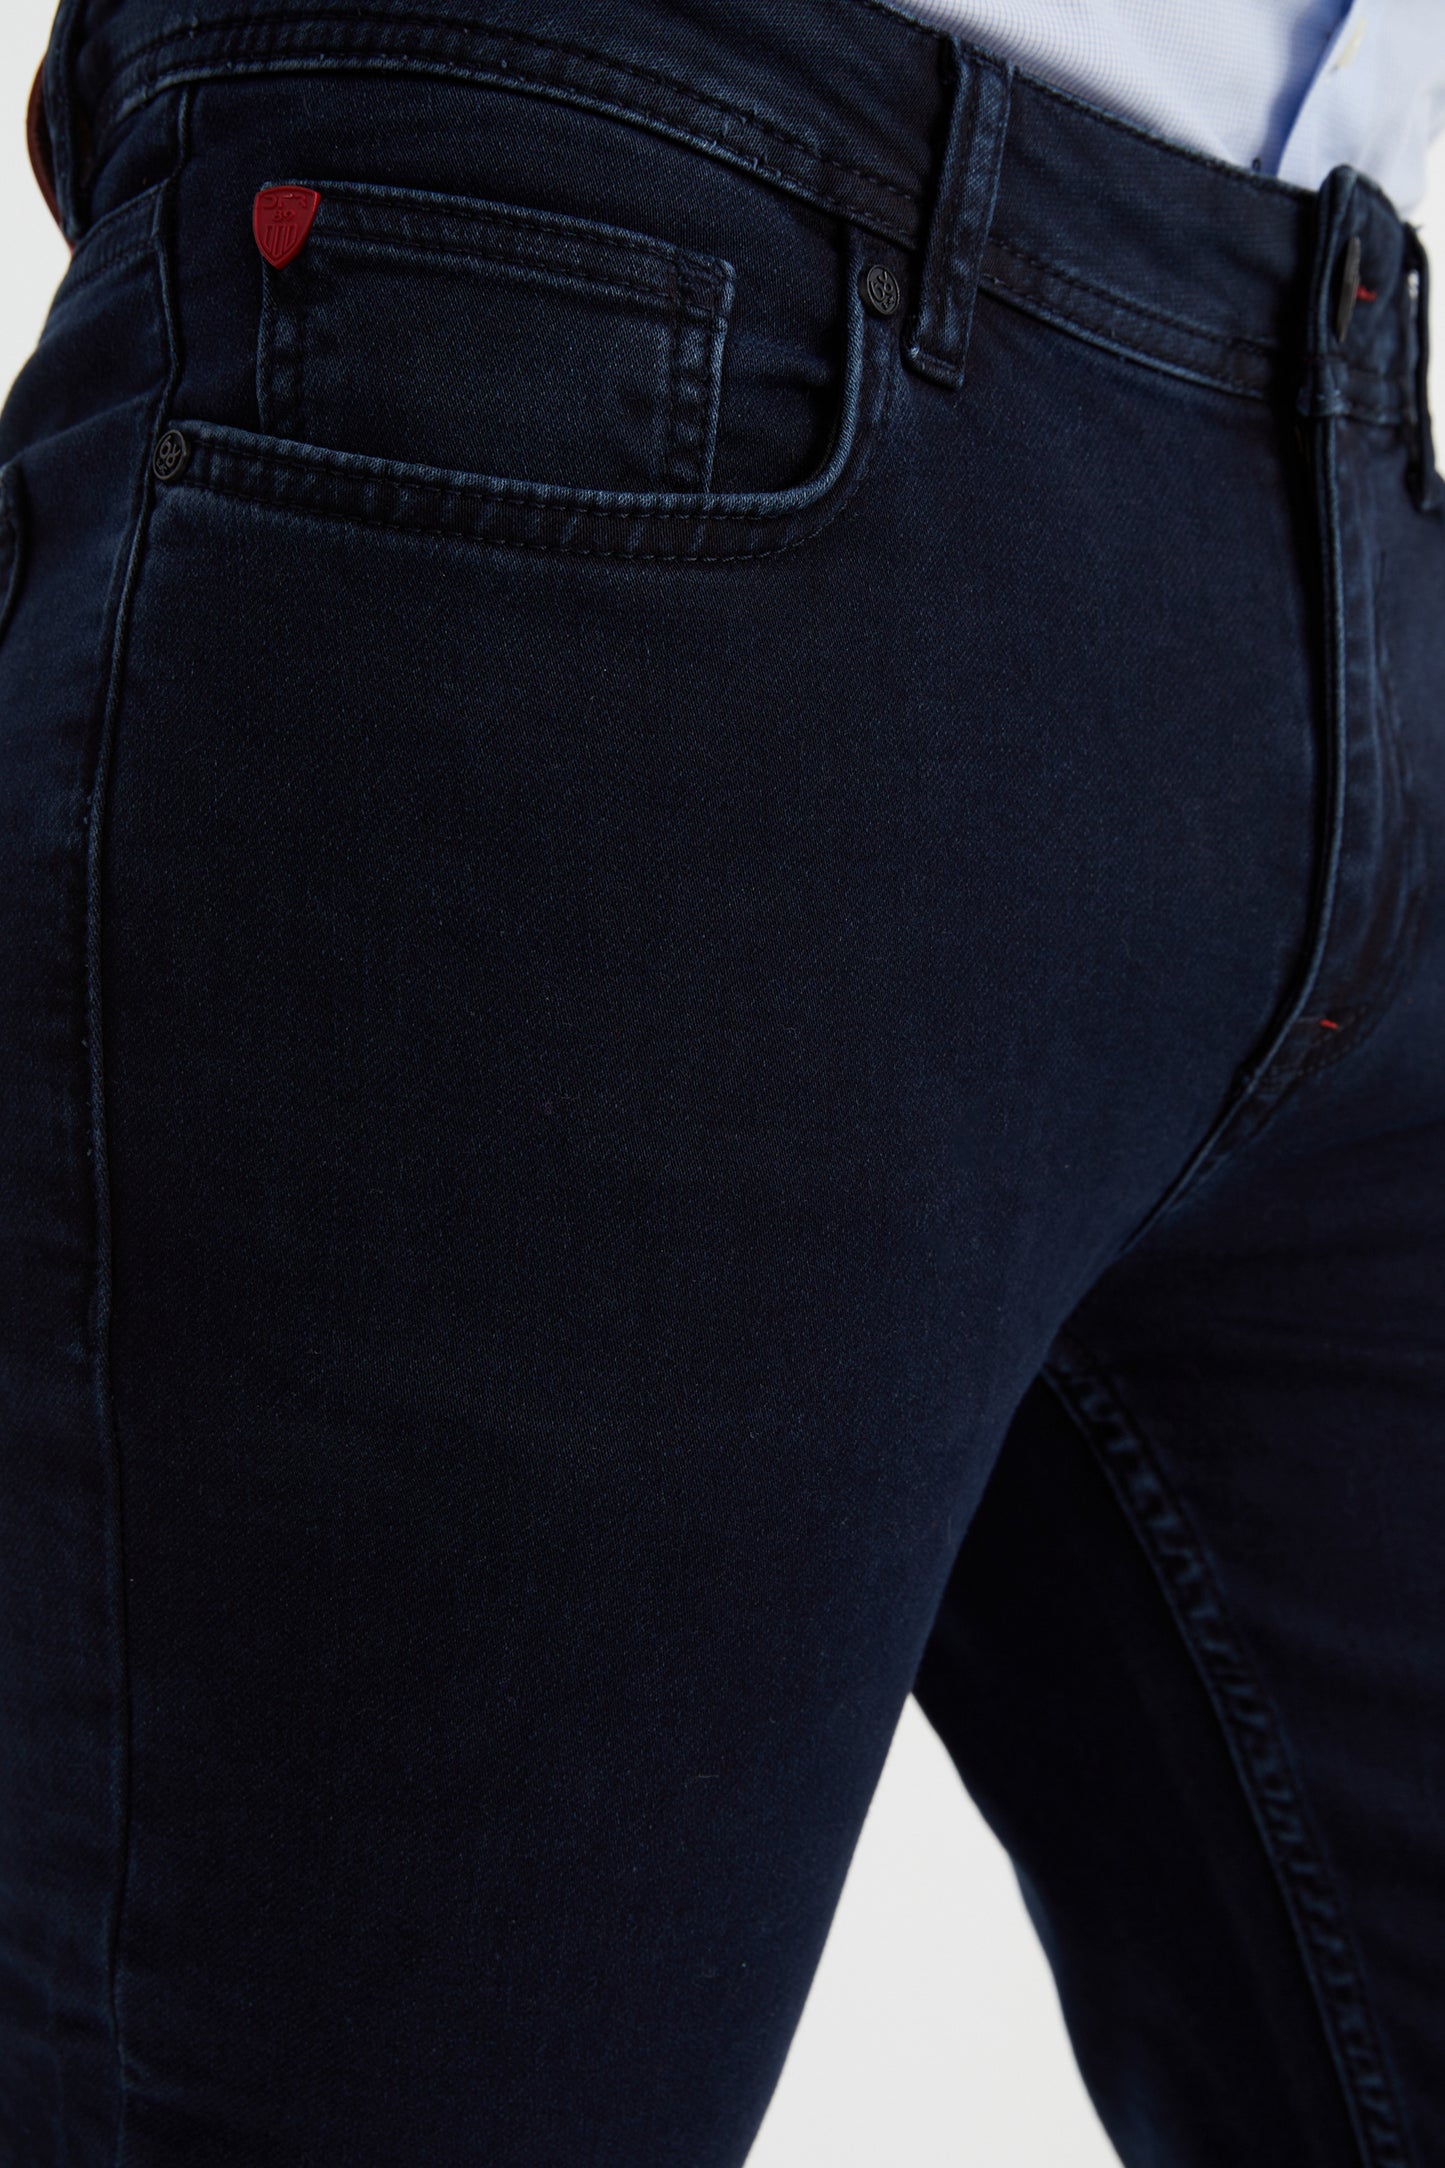 DFR89 stretchy, premium denim jeans, navy blue. Built for style and comfort